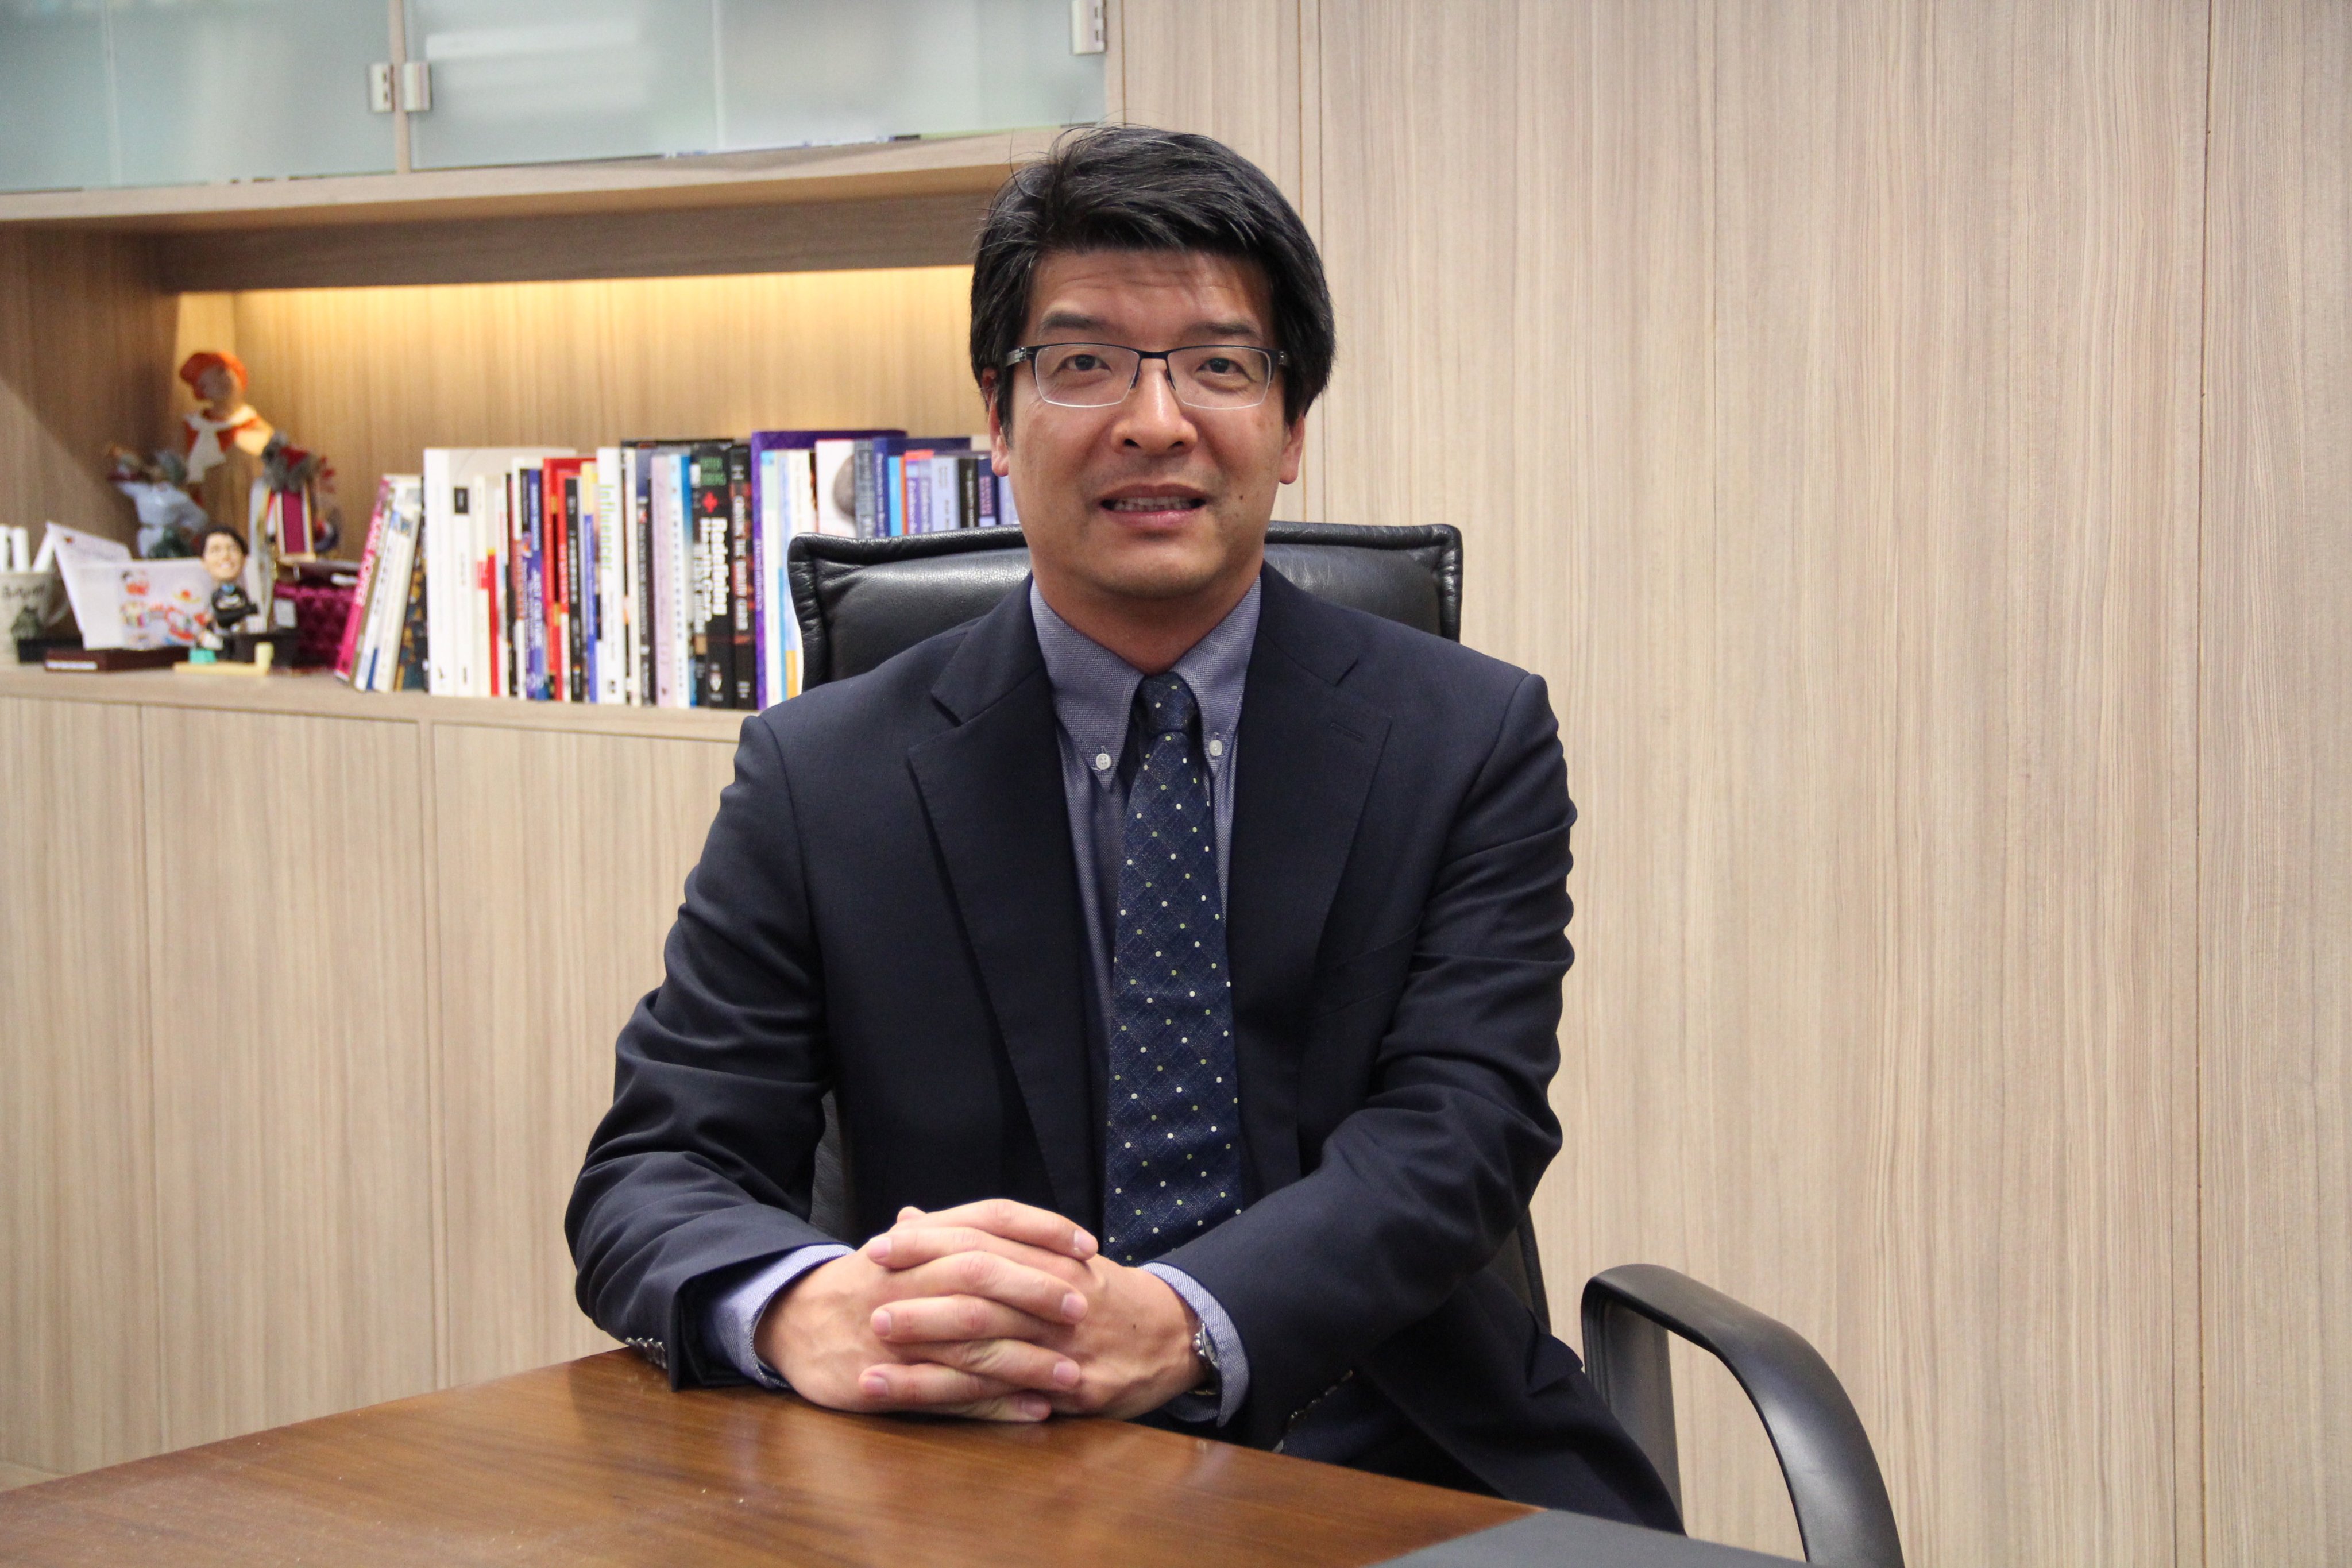 Dr Pang Fei-chau started in the new role on Monday. Photo: Handout